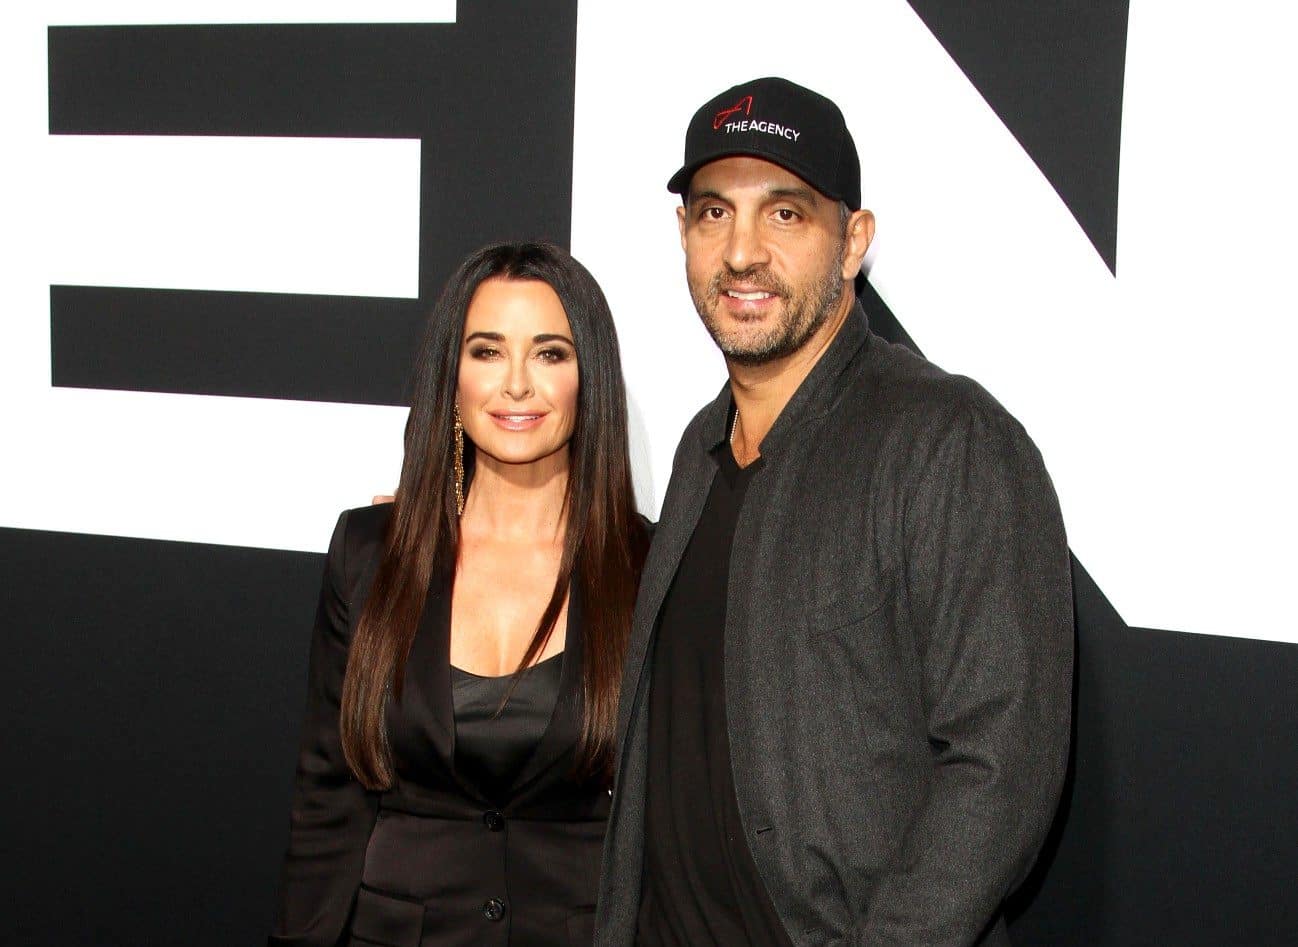 Mauricio Umansky on His "Pact" With the RHOBH Husbands, the Show's "Toxic" Drama, and Housewives Divorces, Plus How He Supports Kyle